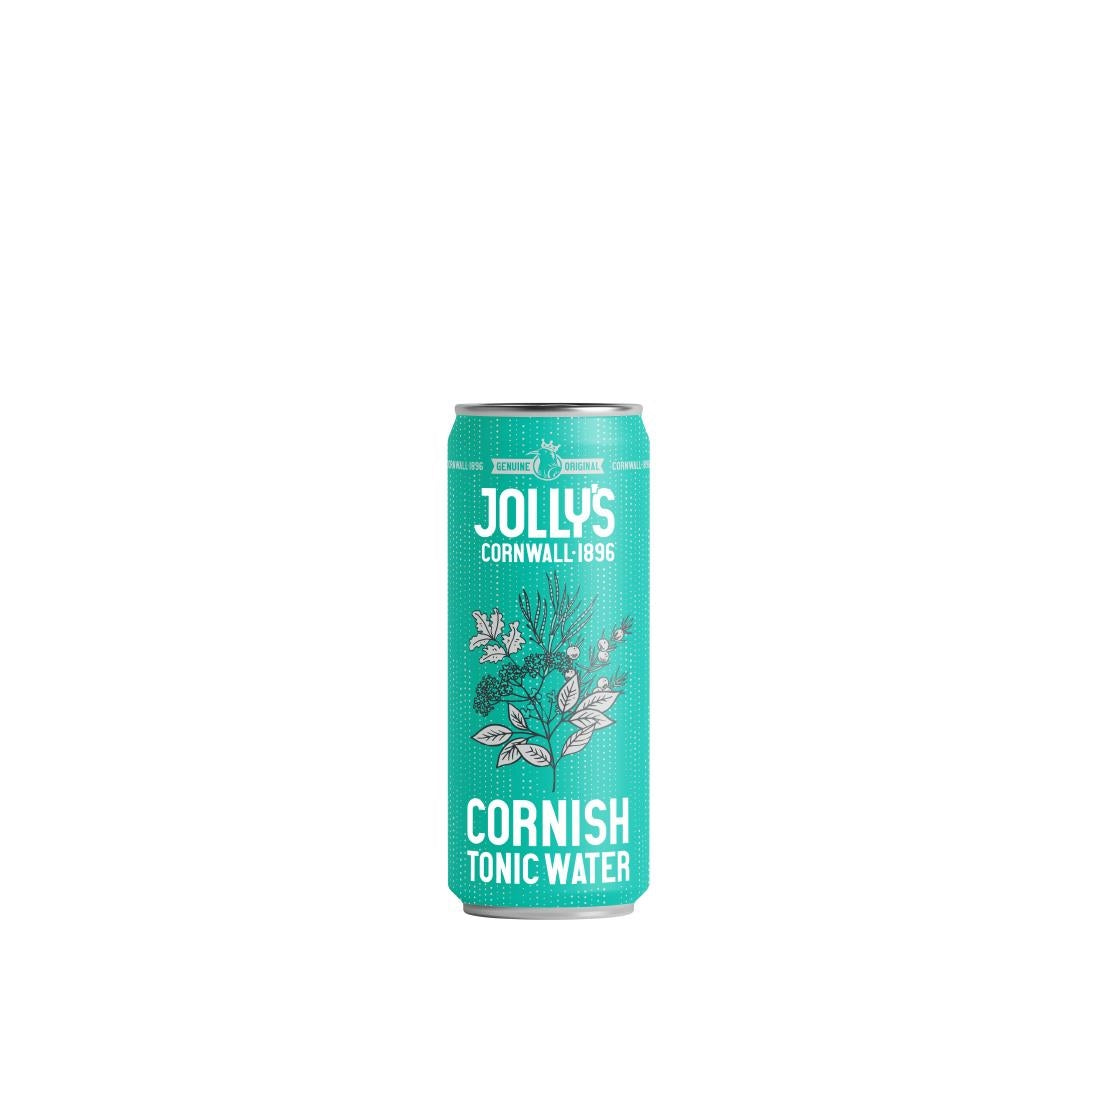 HN947 Jolly's Cornish Tonic Water Cans 200ml (Pack of 24)